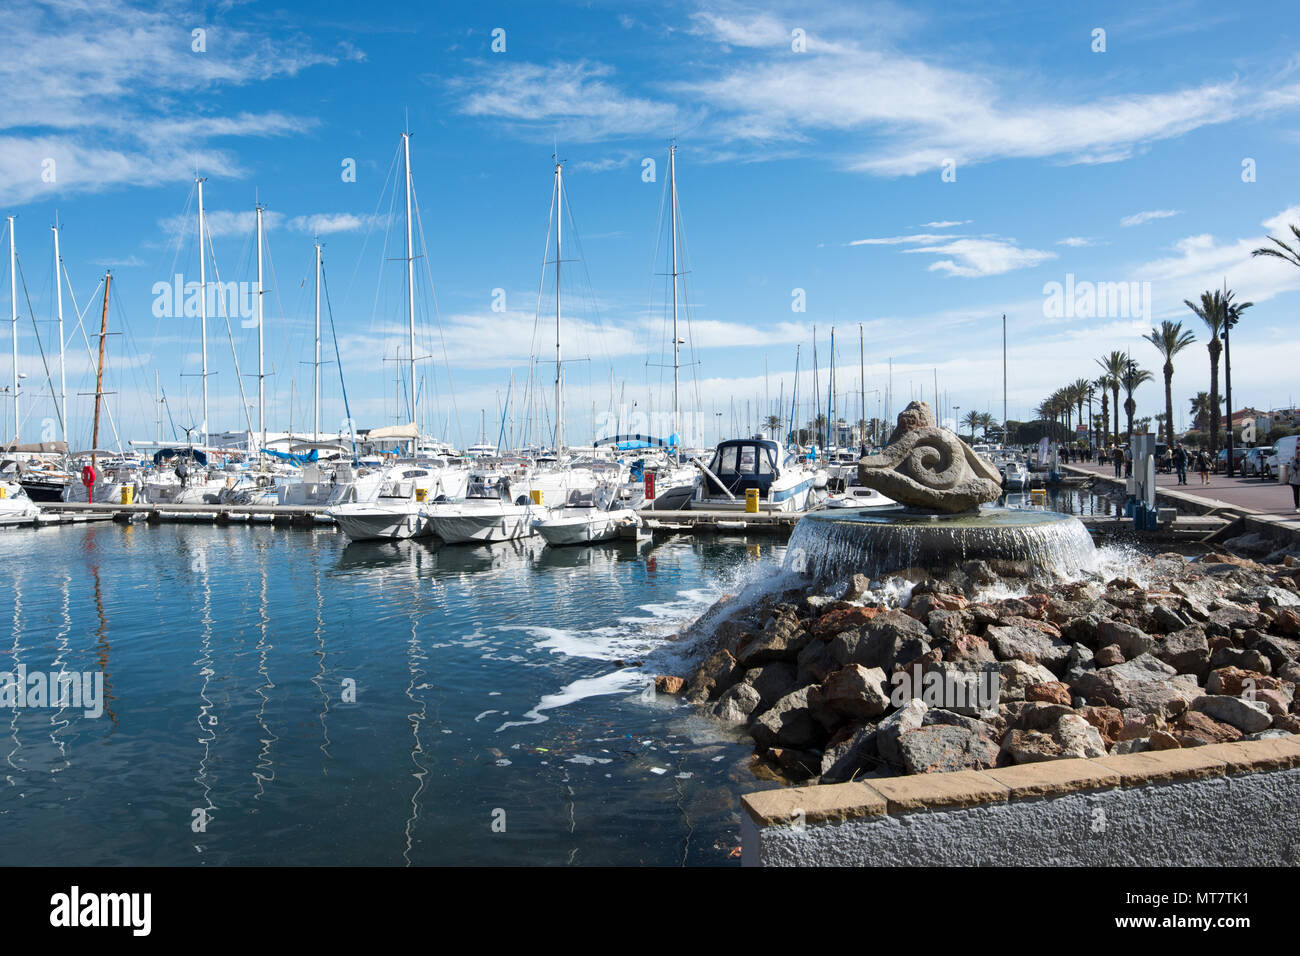 Marina and water feature at the port of Saint-Cyprien Plage, Roussillon,  Pyrenees-Orientales, France Stock Photo - Alamy